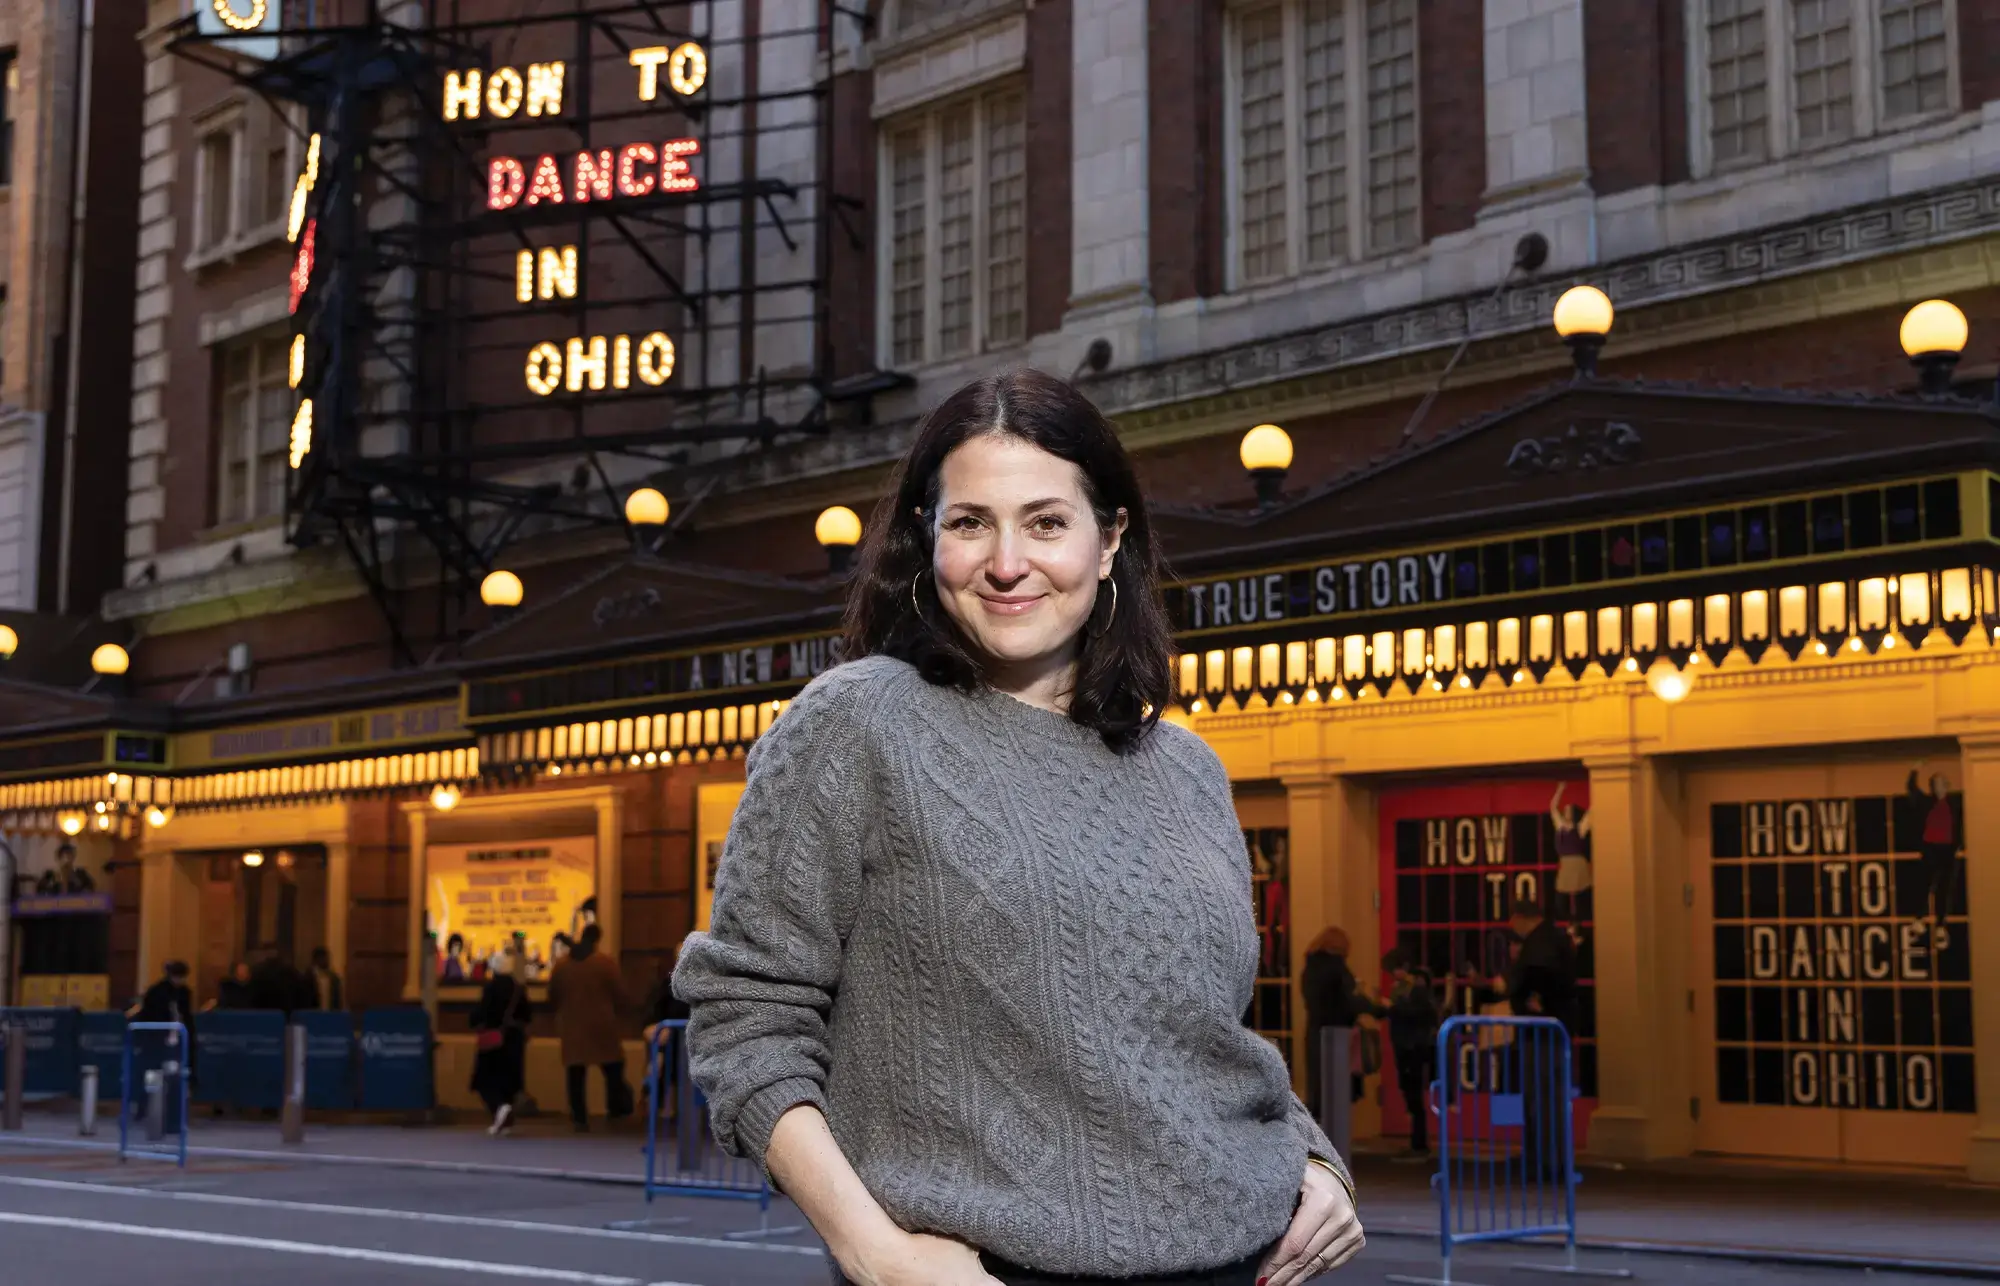 Alexandra Shiva, class of 1995, stands across from the marquee of How to Dance in Ohio, on Broadway in NYC.